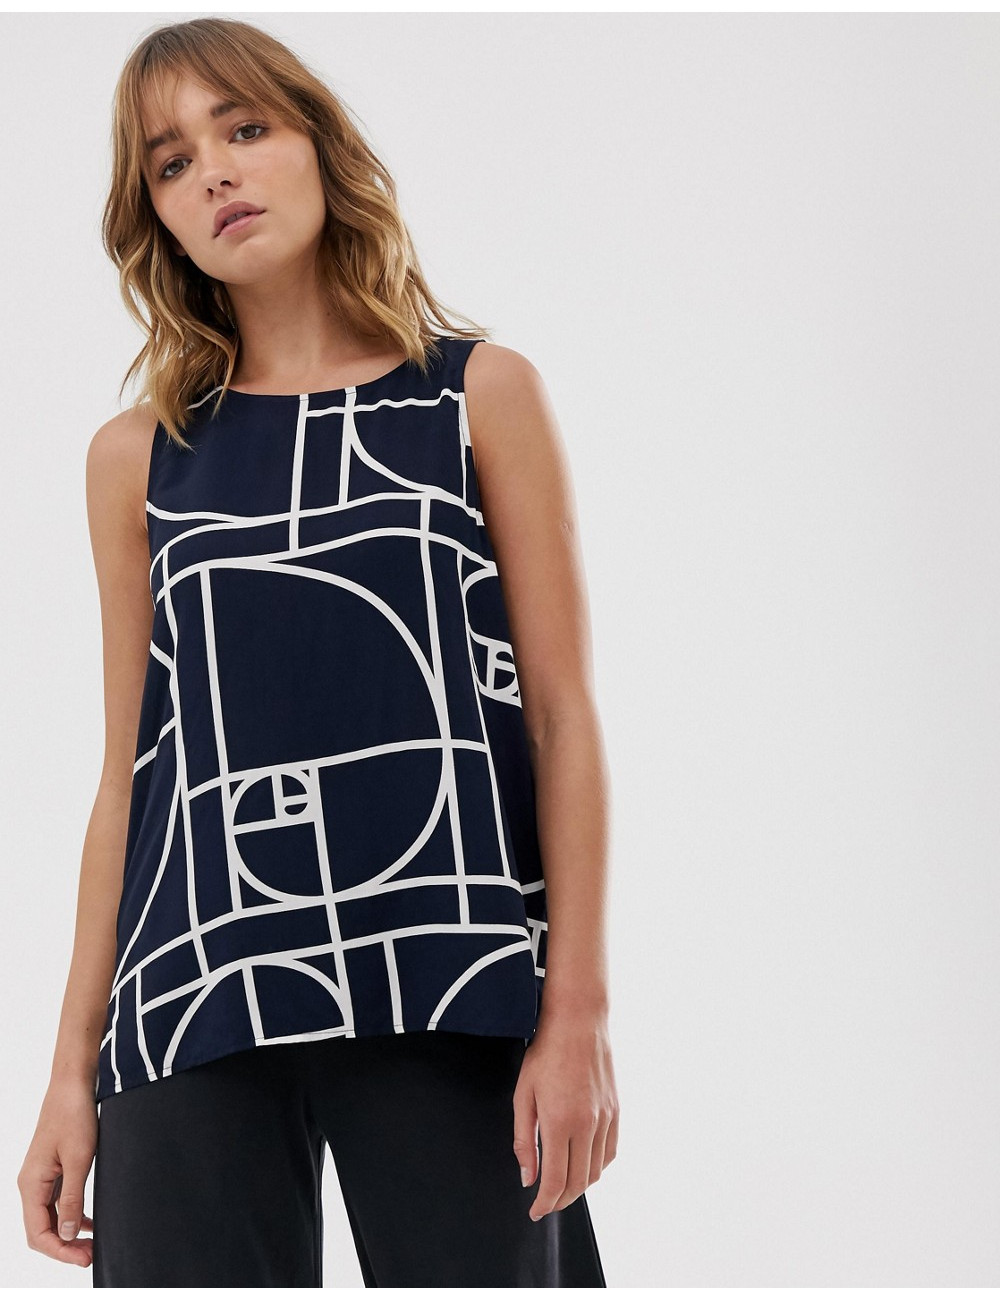 Weekday tank top in graphic...